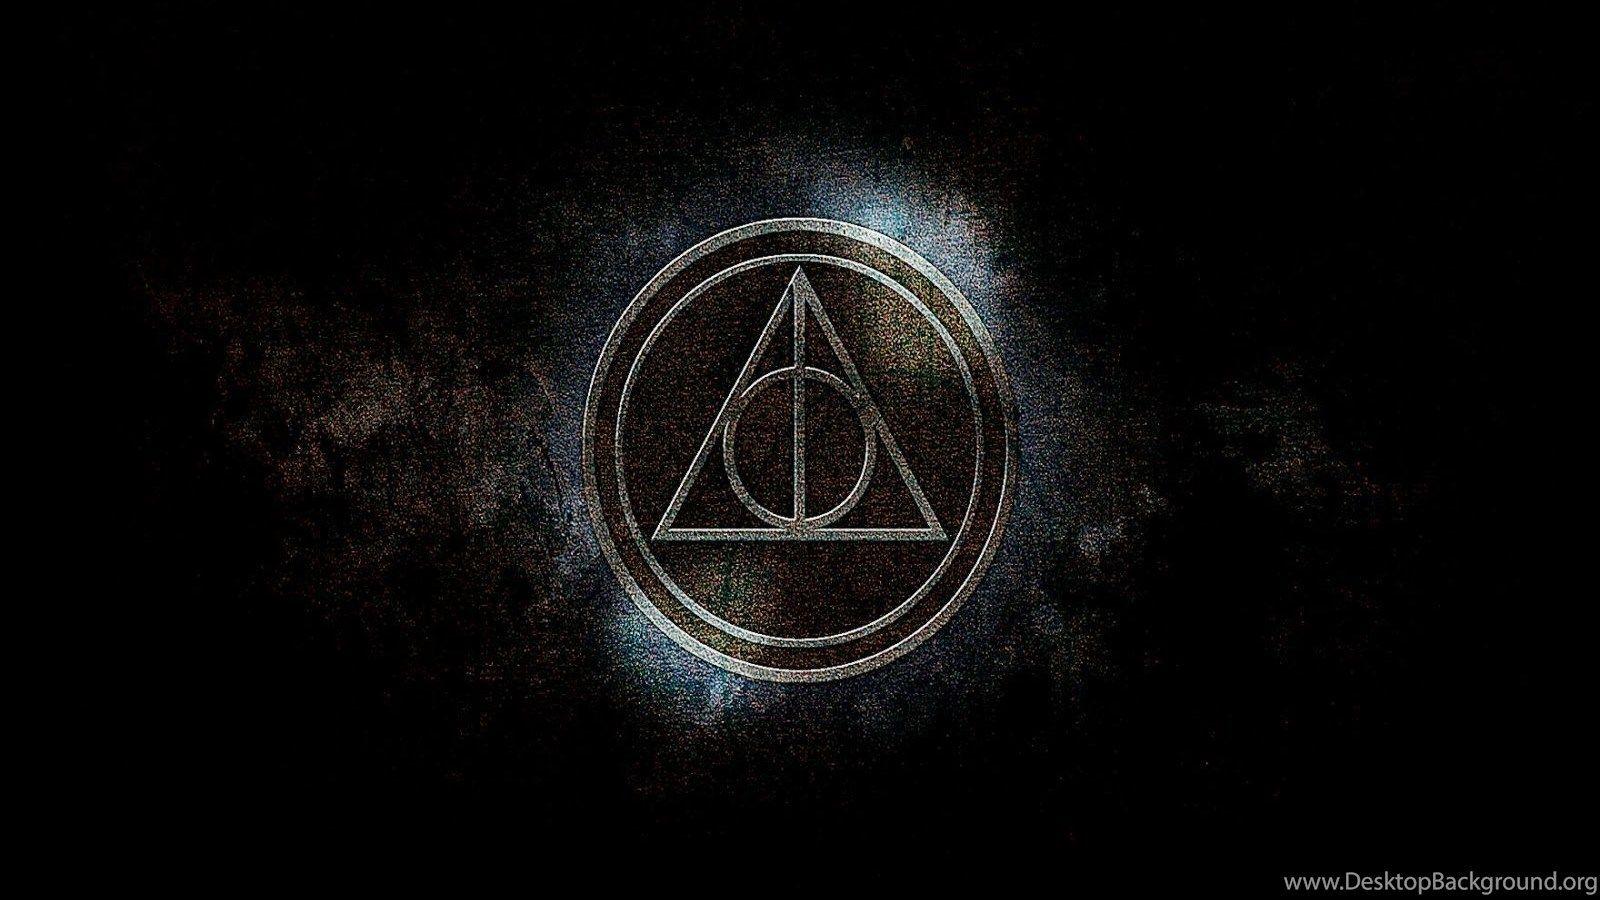 16 9 Hd Harry Potter Wallpapers - Top Free 16 9 Hd Harry Potter